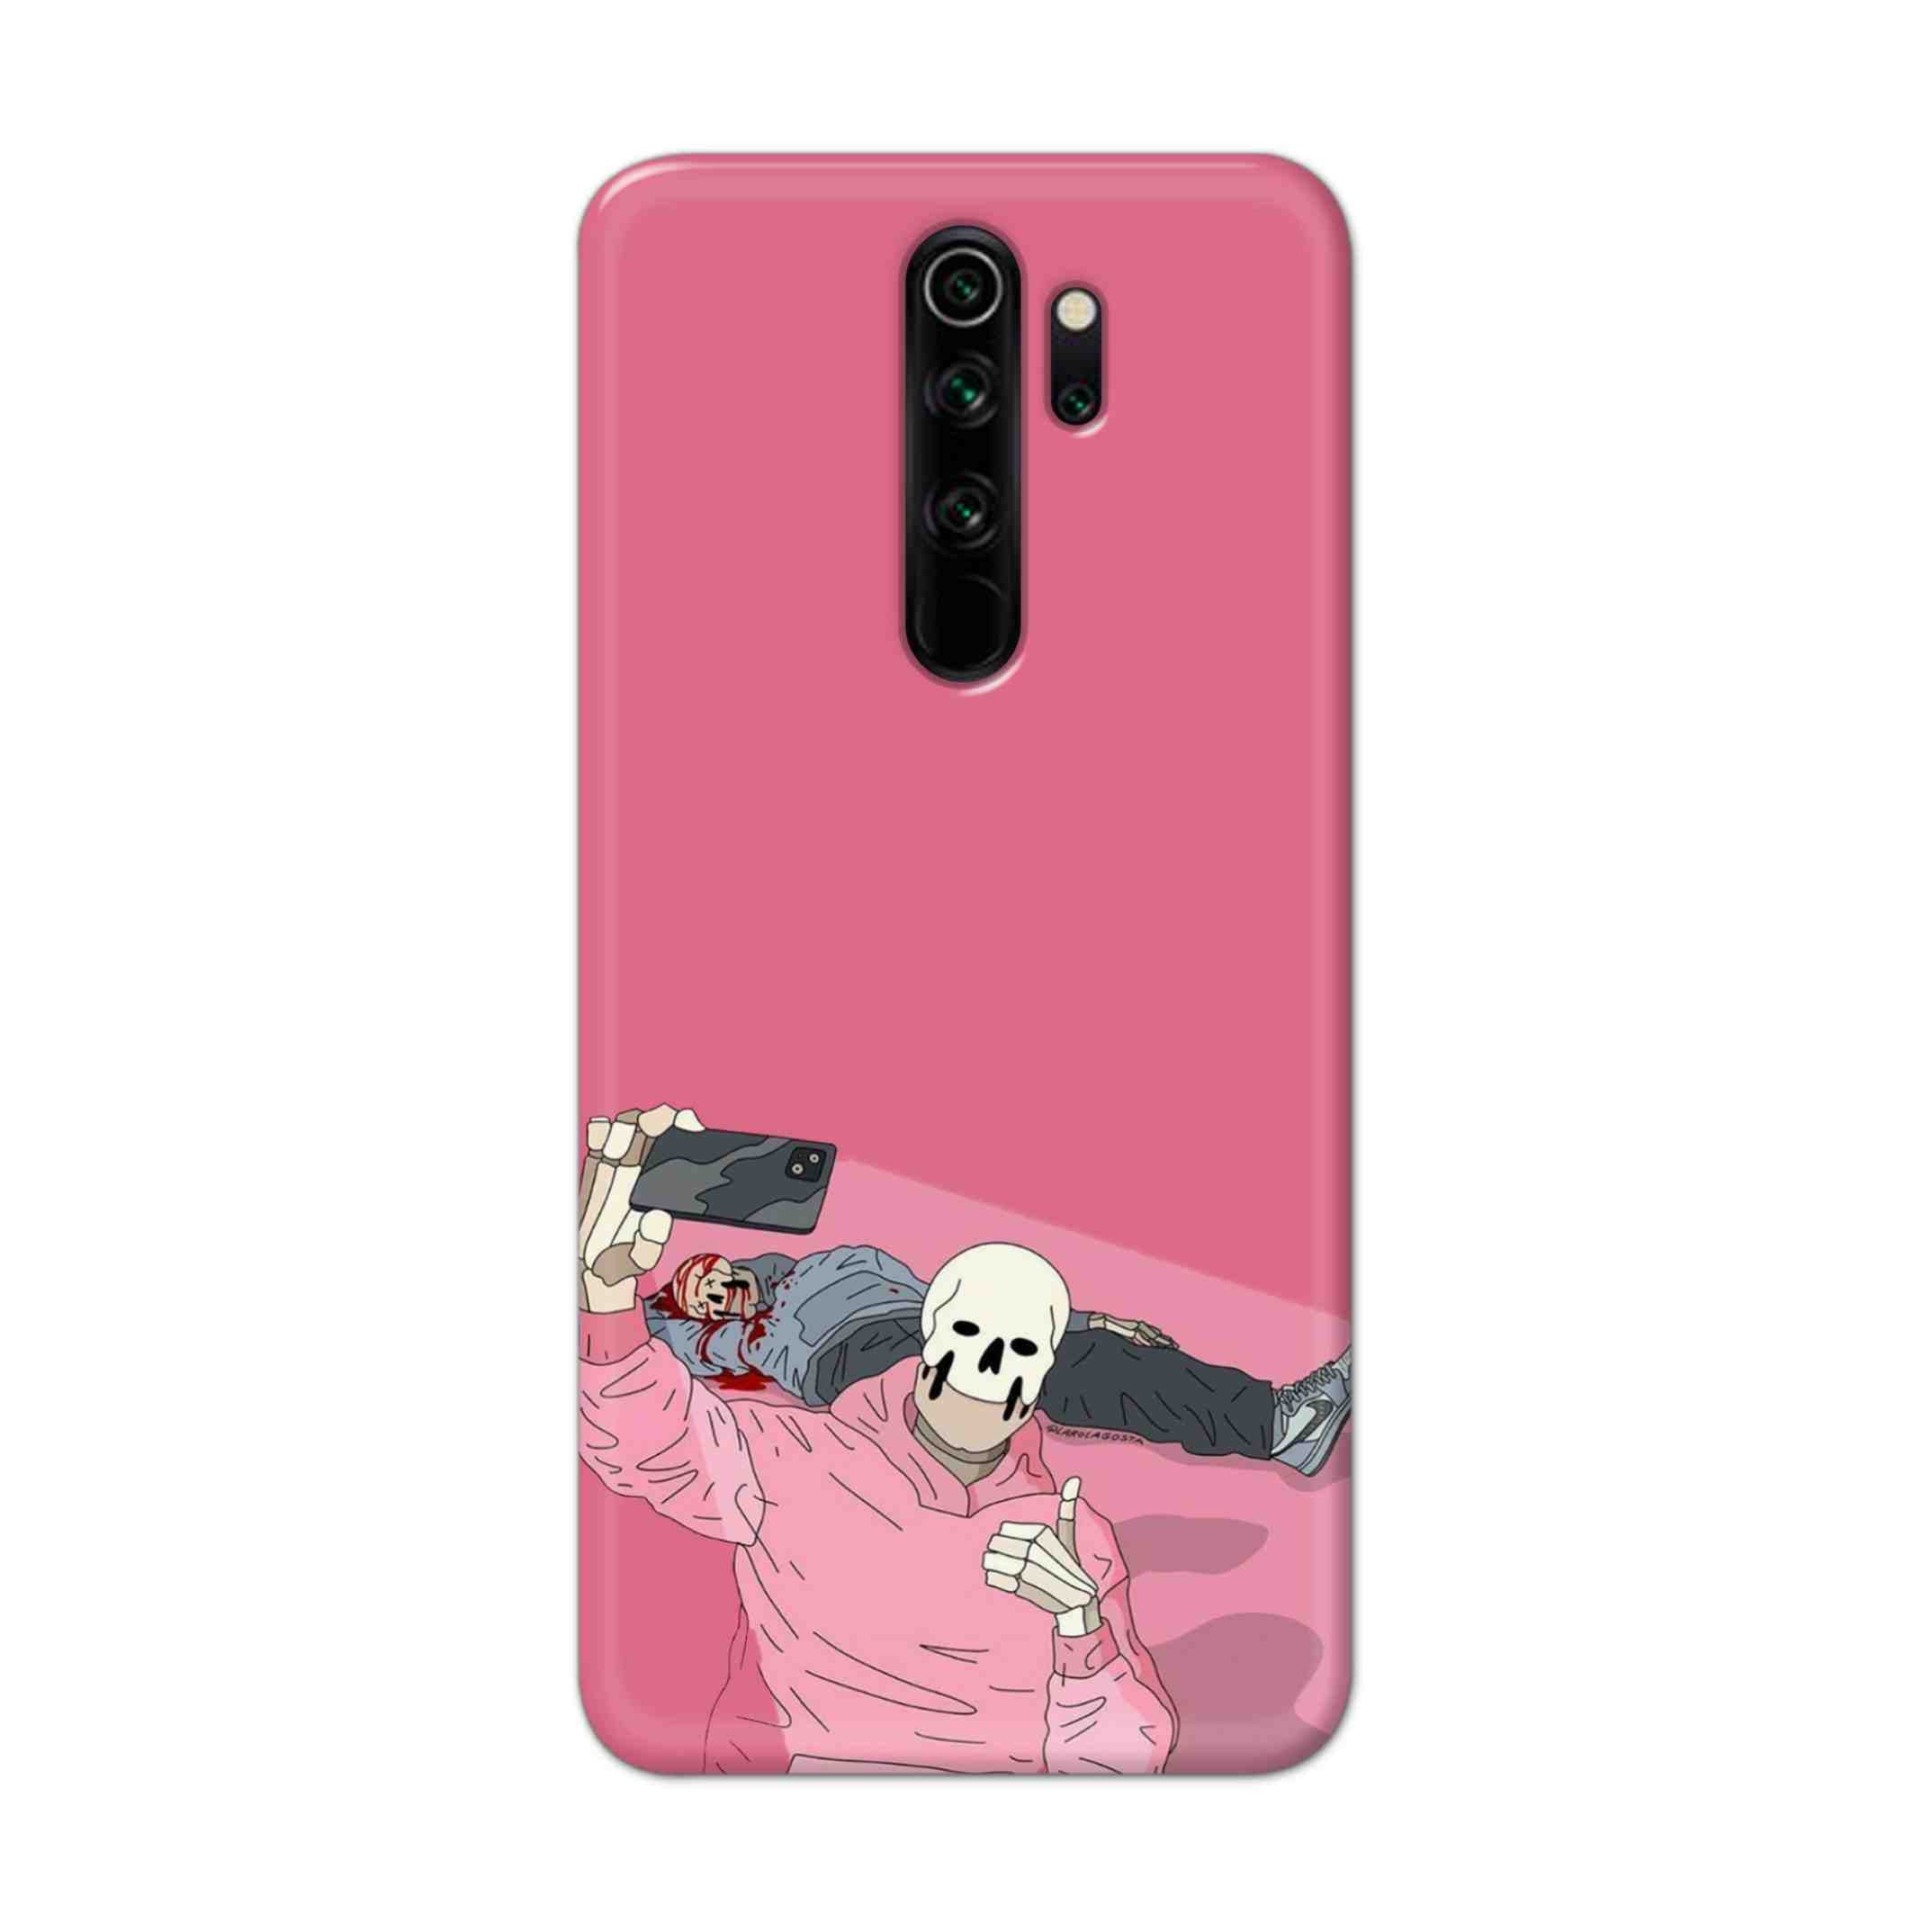 Buy Selfie Hard Back Mobile Phone Case Cover For Xiaomi Redmi Note 8 Pro Online